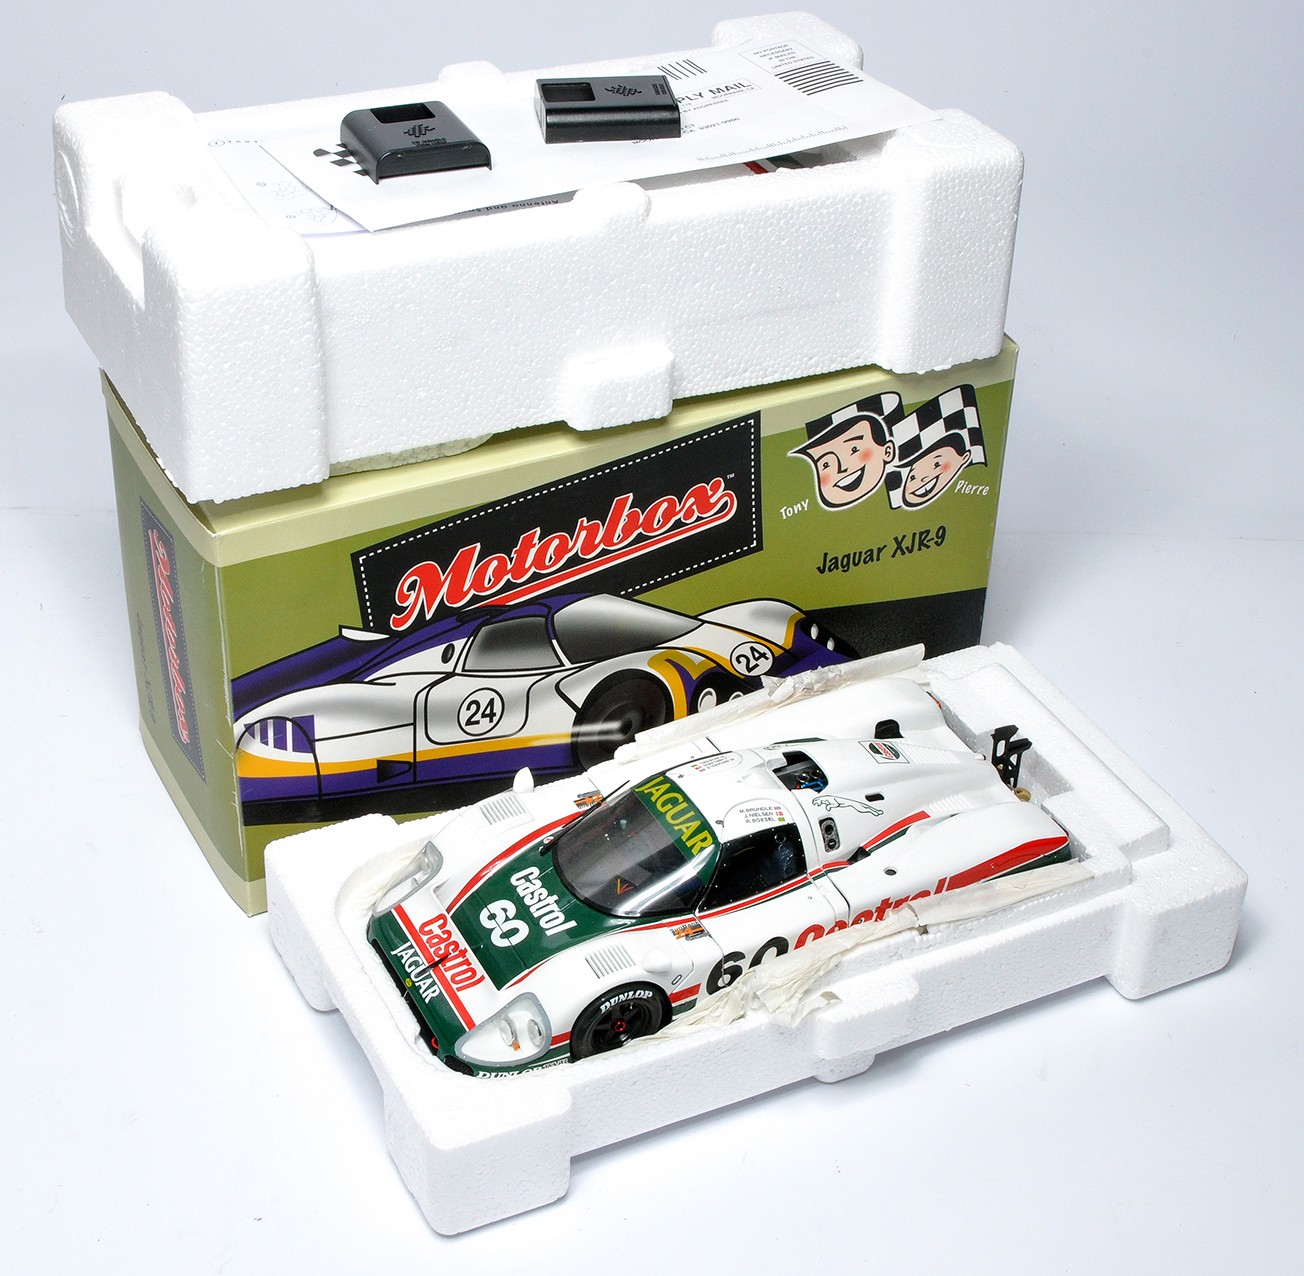 Exoto Motorbox 1/18 diecast model racing car issue comprising Jaguar XJR-9. Looks to be without